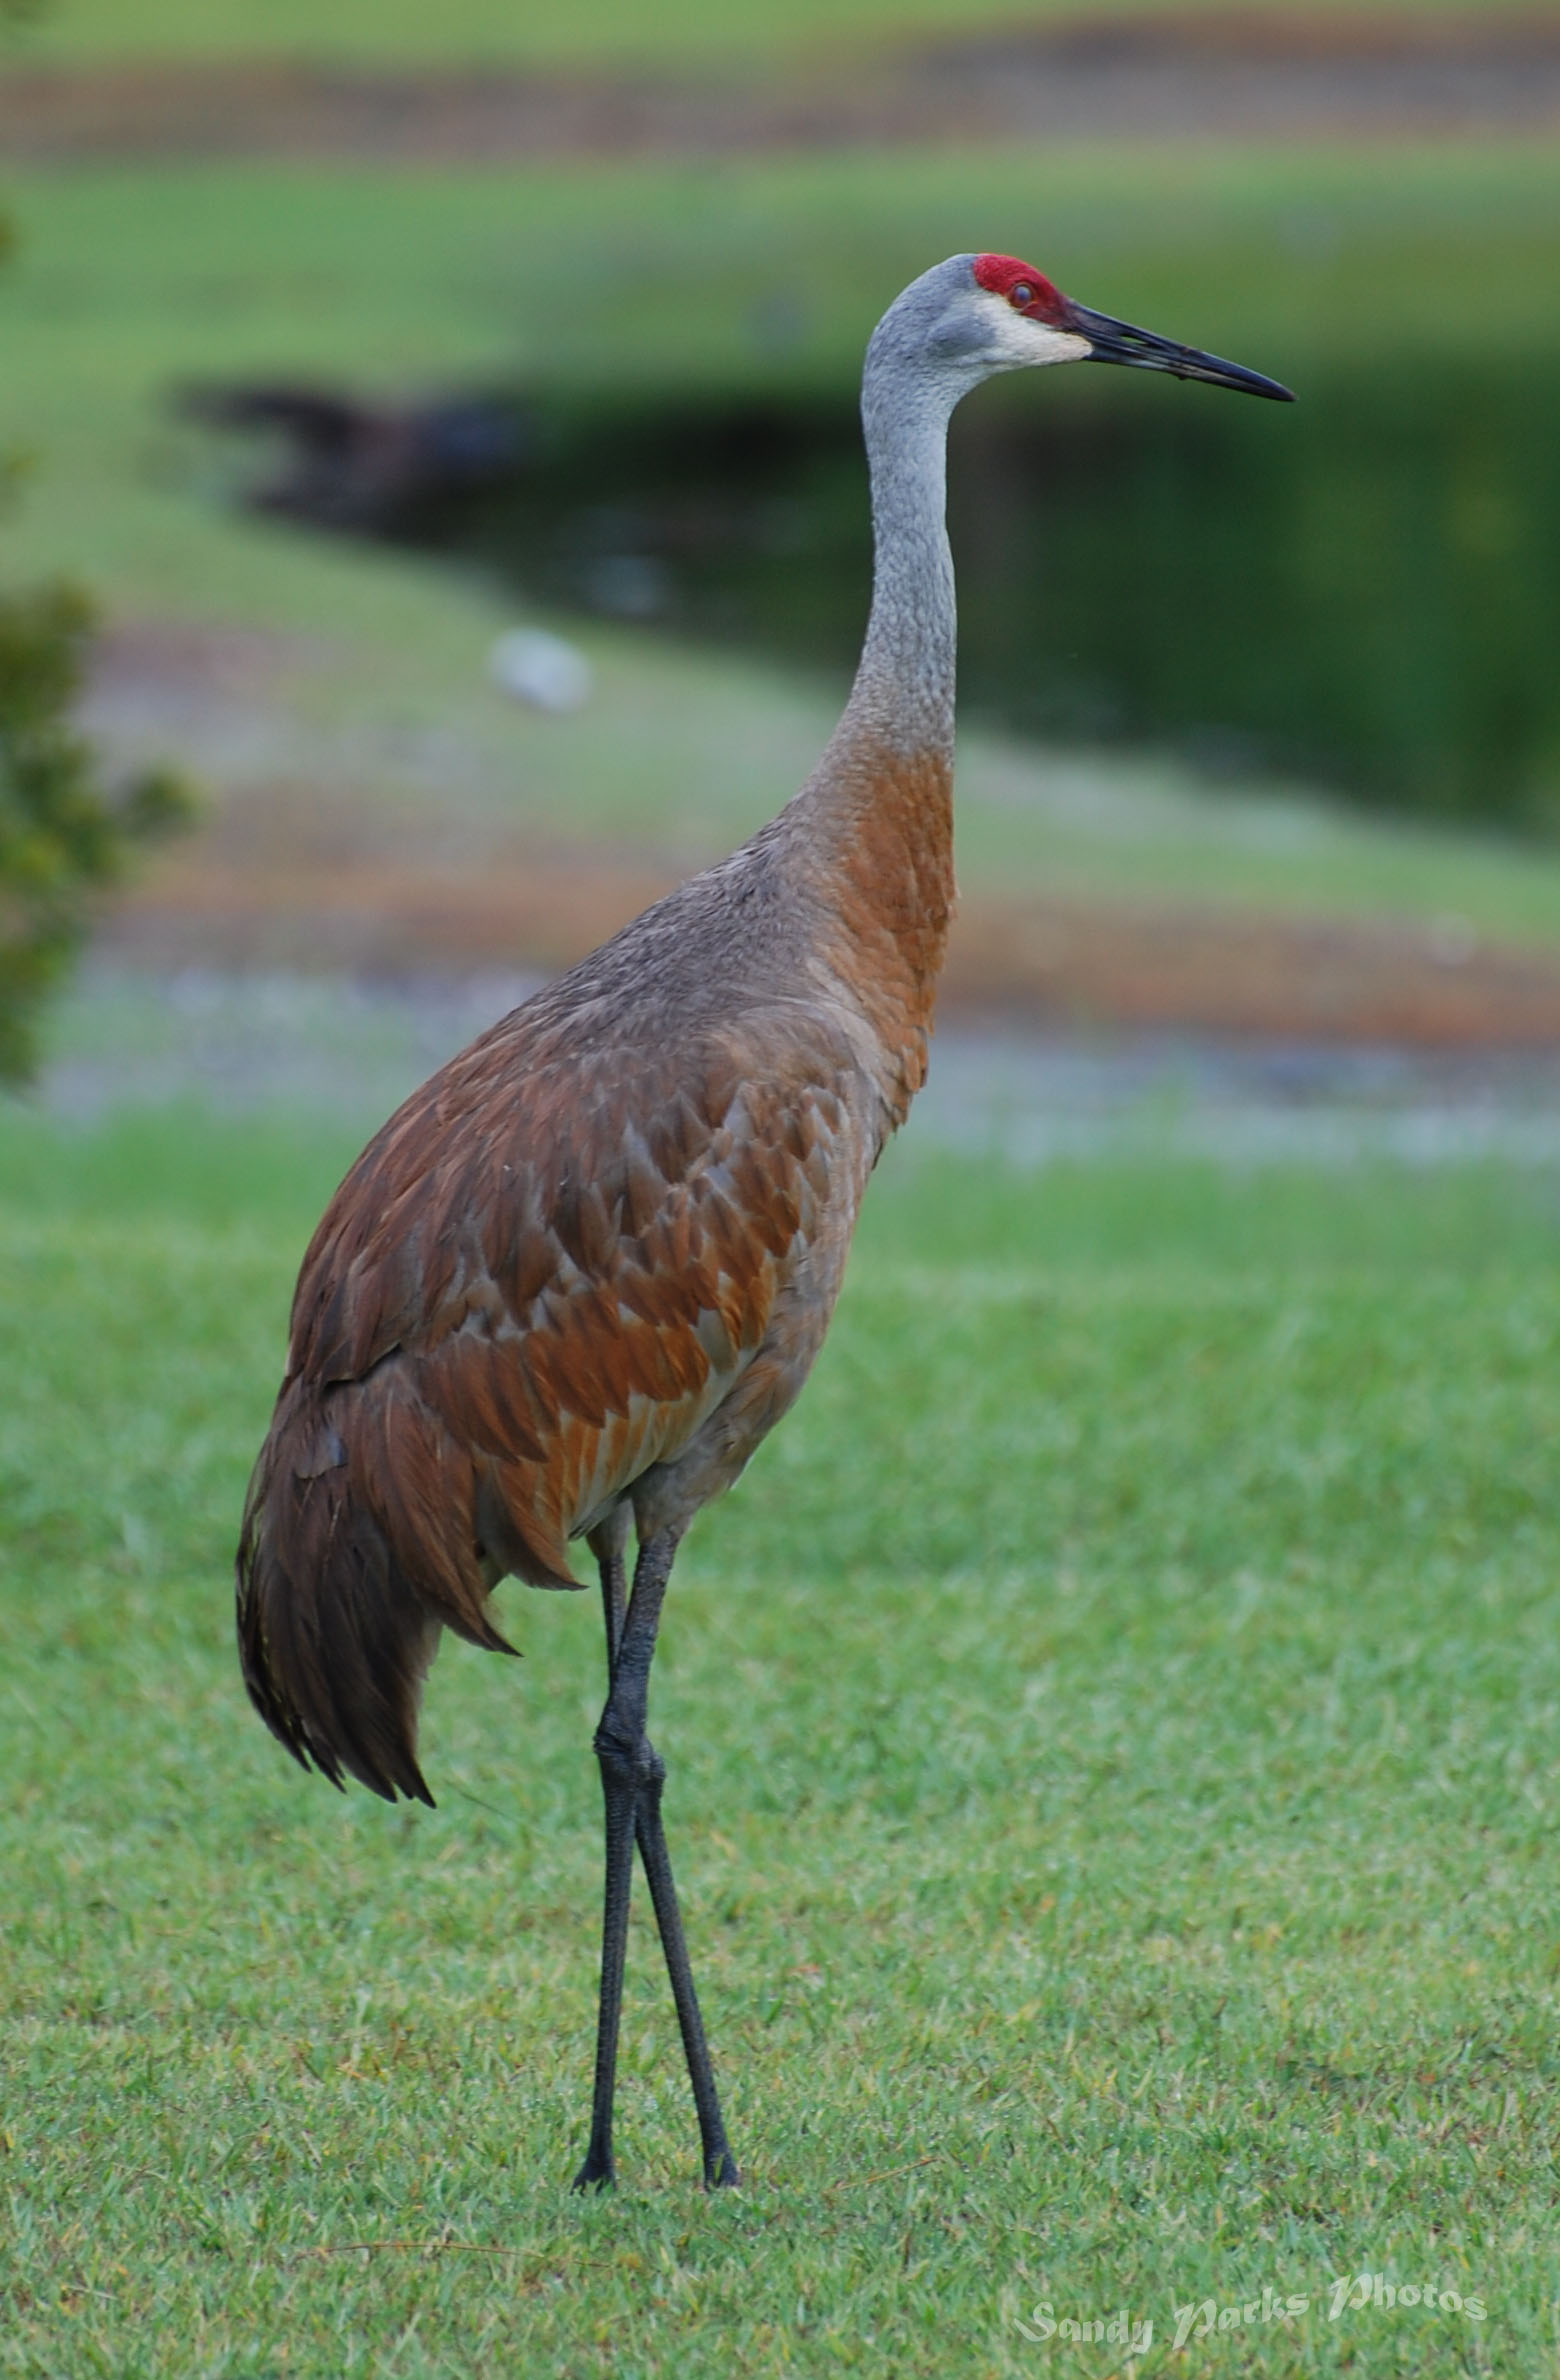 The Sandhill Crane can be curious and rather fearless, when it comes to cars and planes.